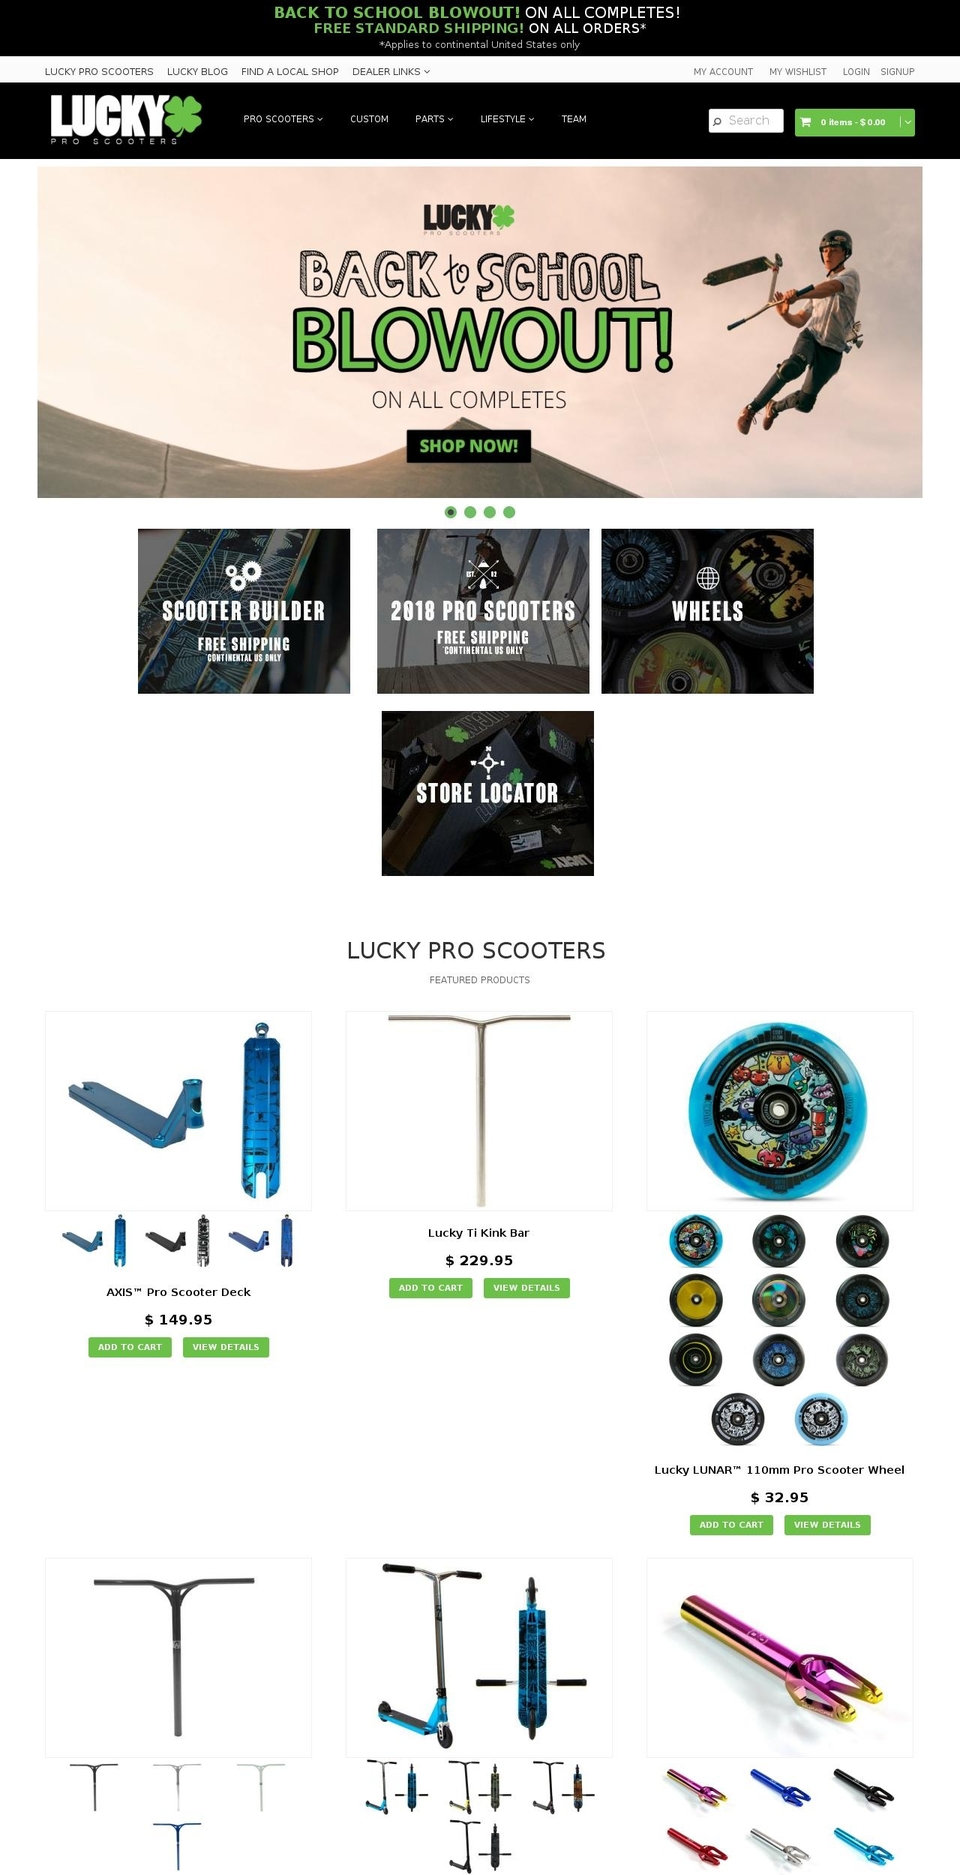 Lucky Scooters Live Theme 2-17-2017 Shopify theme site example lucky-scooter.com